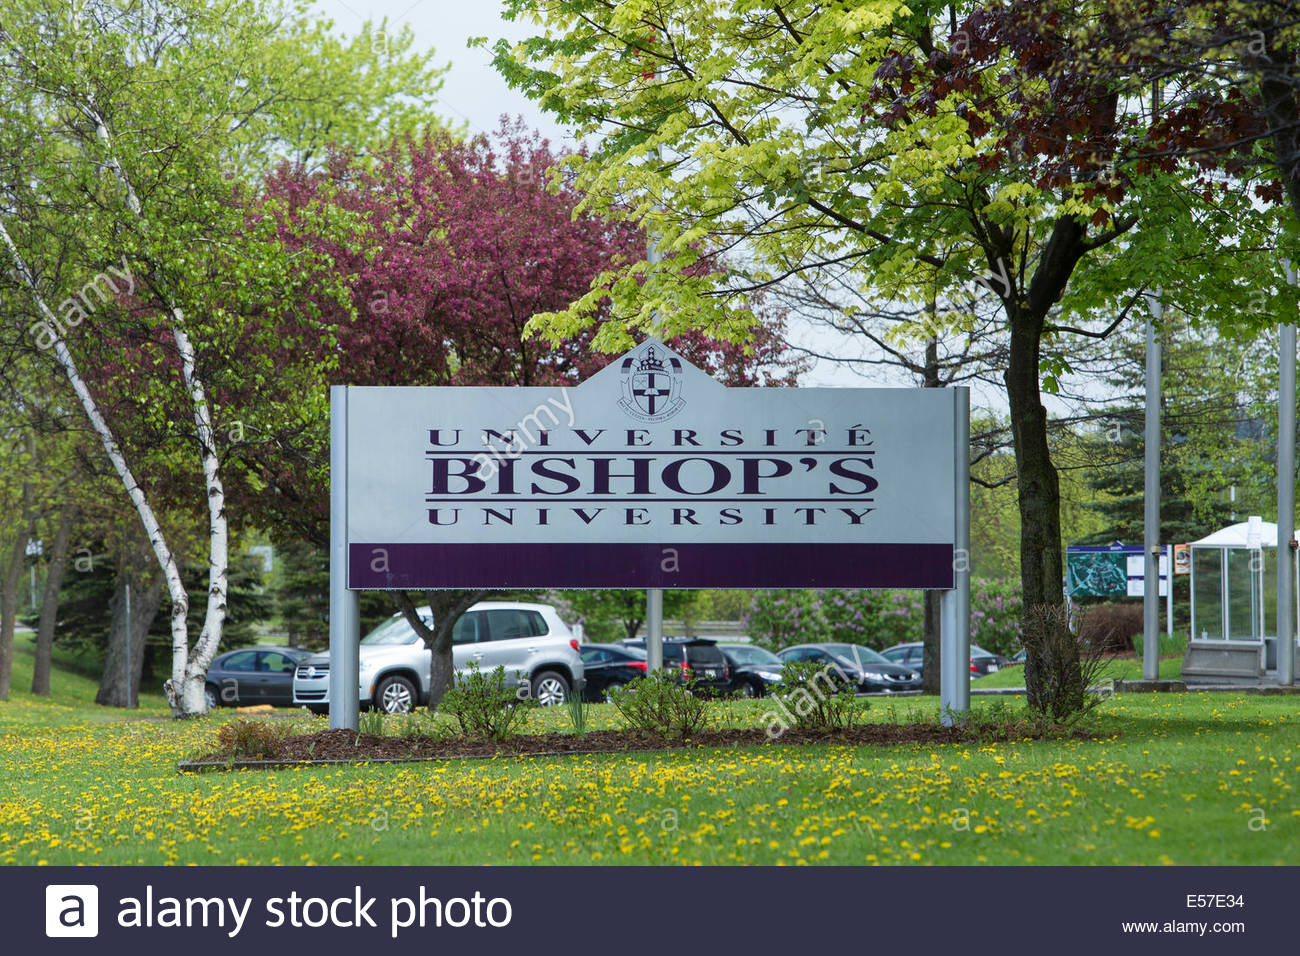 universite-bishops-university-is-pictured-in-lennoxville-sherbrooke-E57E34.jpg